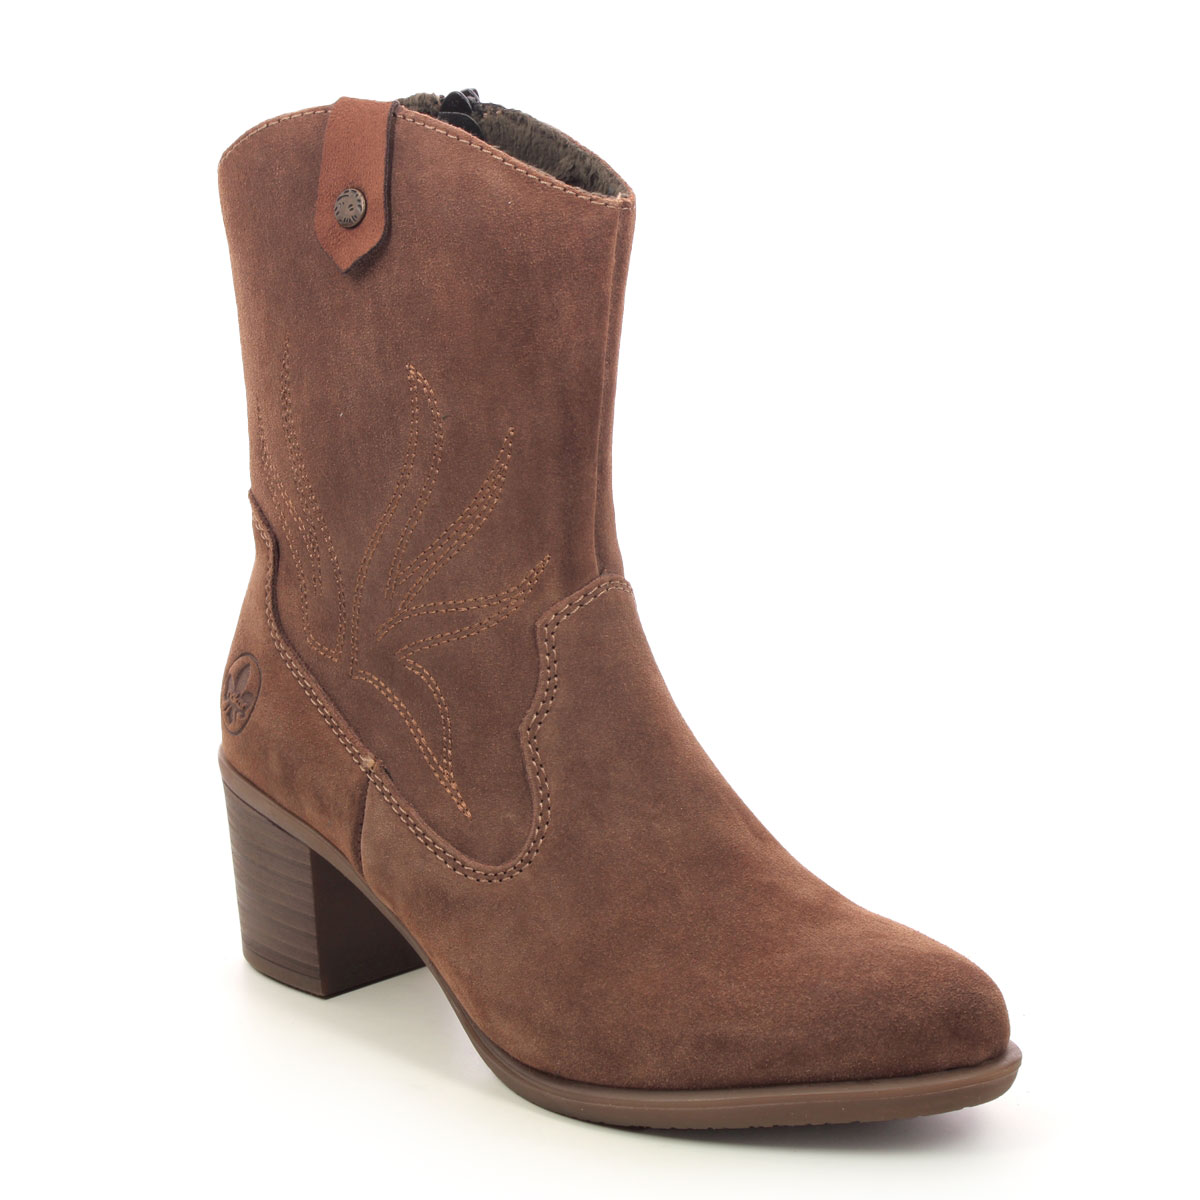 Rieker Saddle West Tan Suede Womens Ankle Boots Y2057-20 In Size 37 In Plain Tan Suede